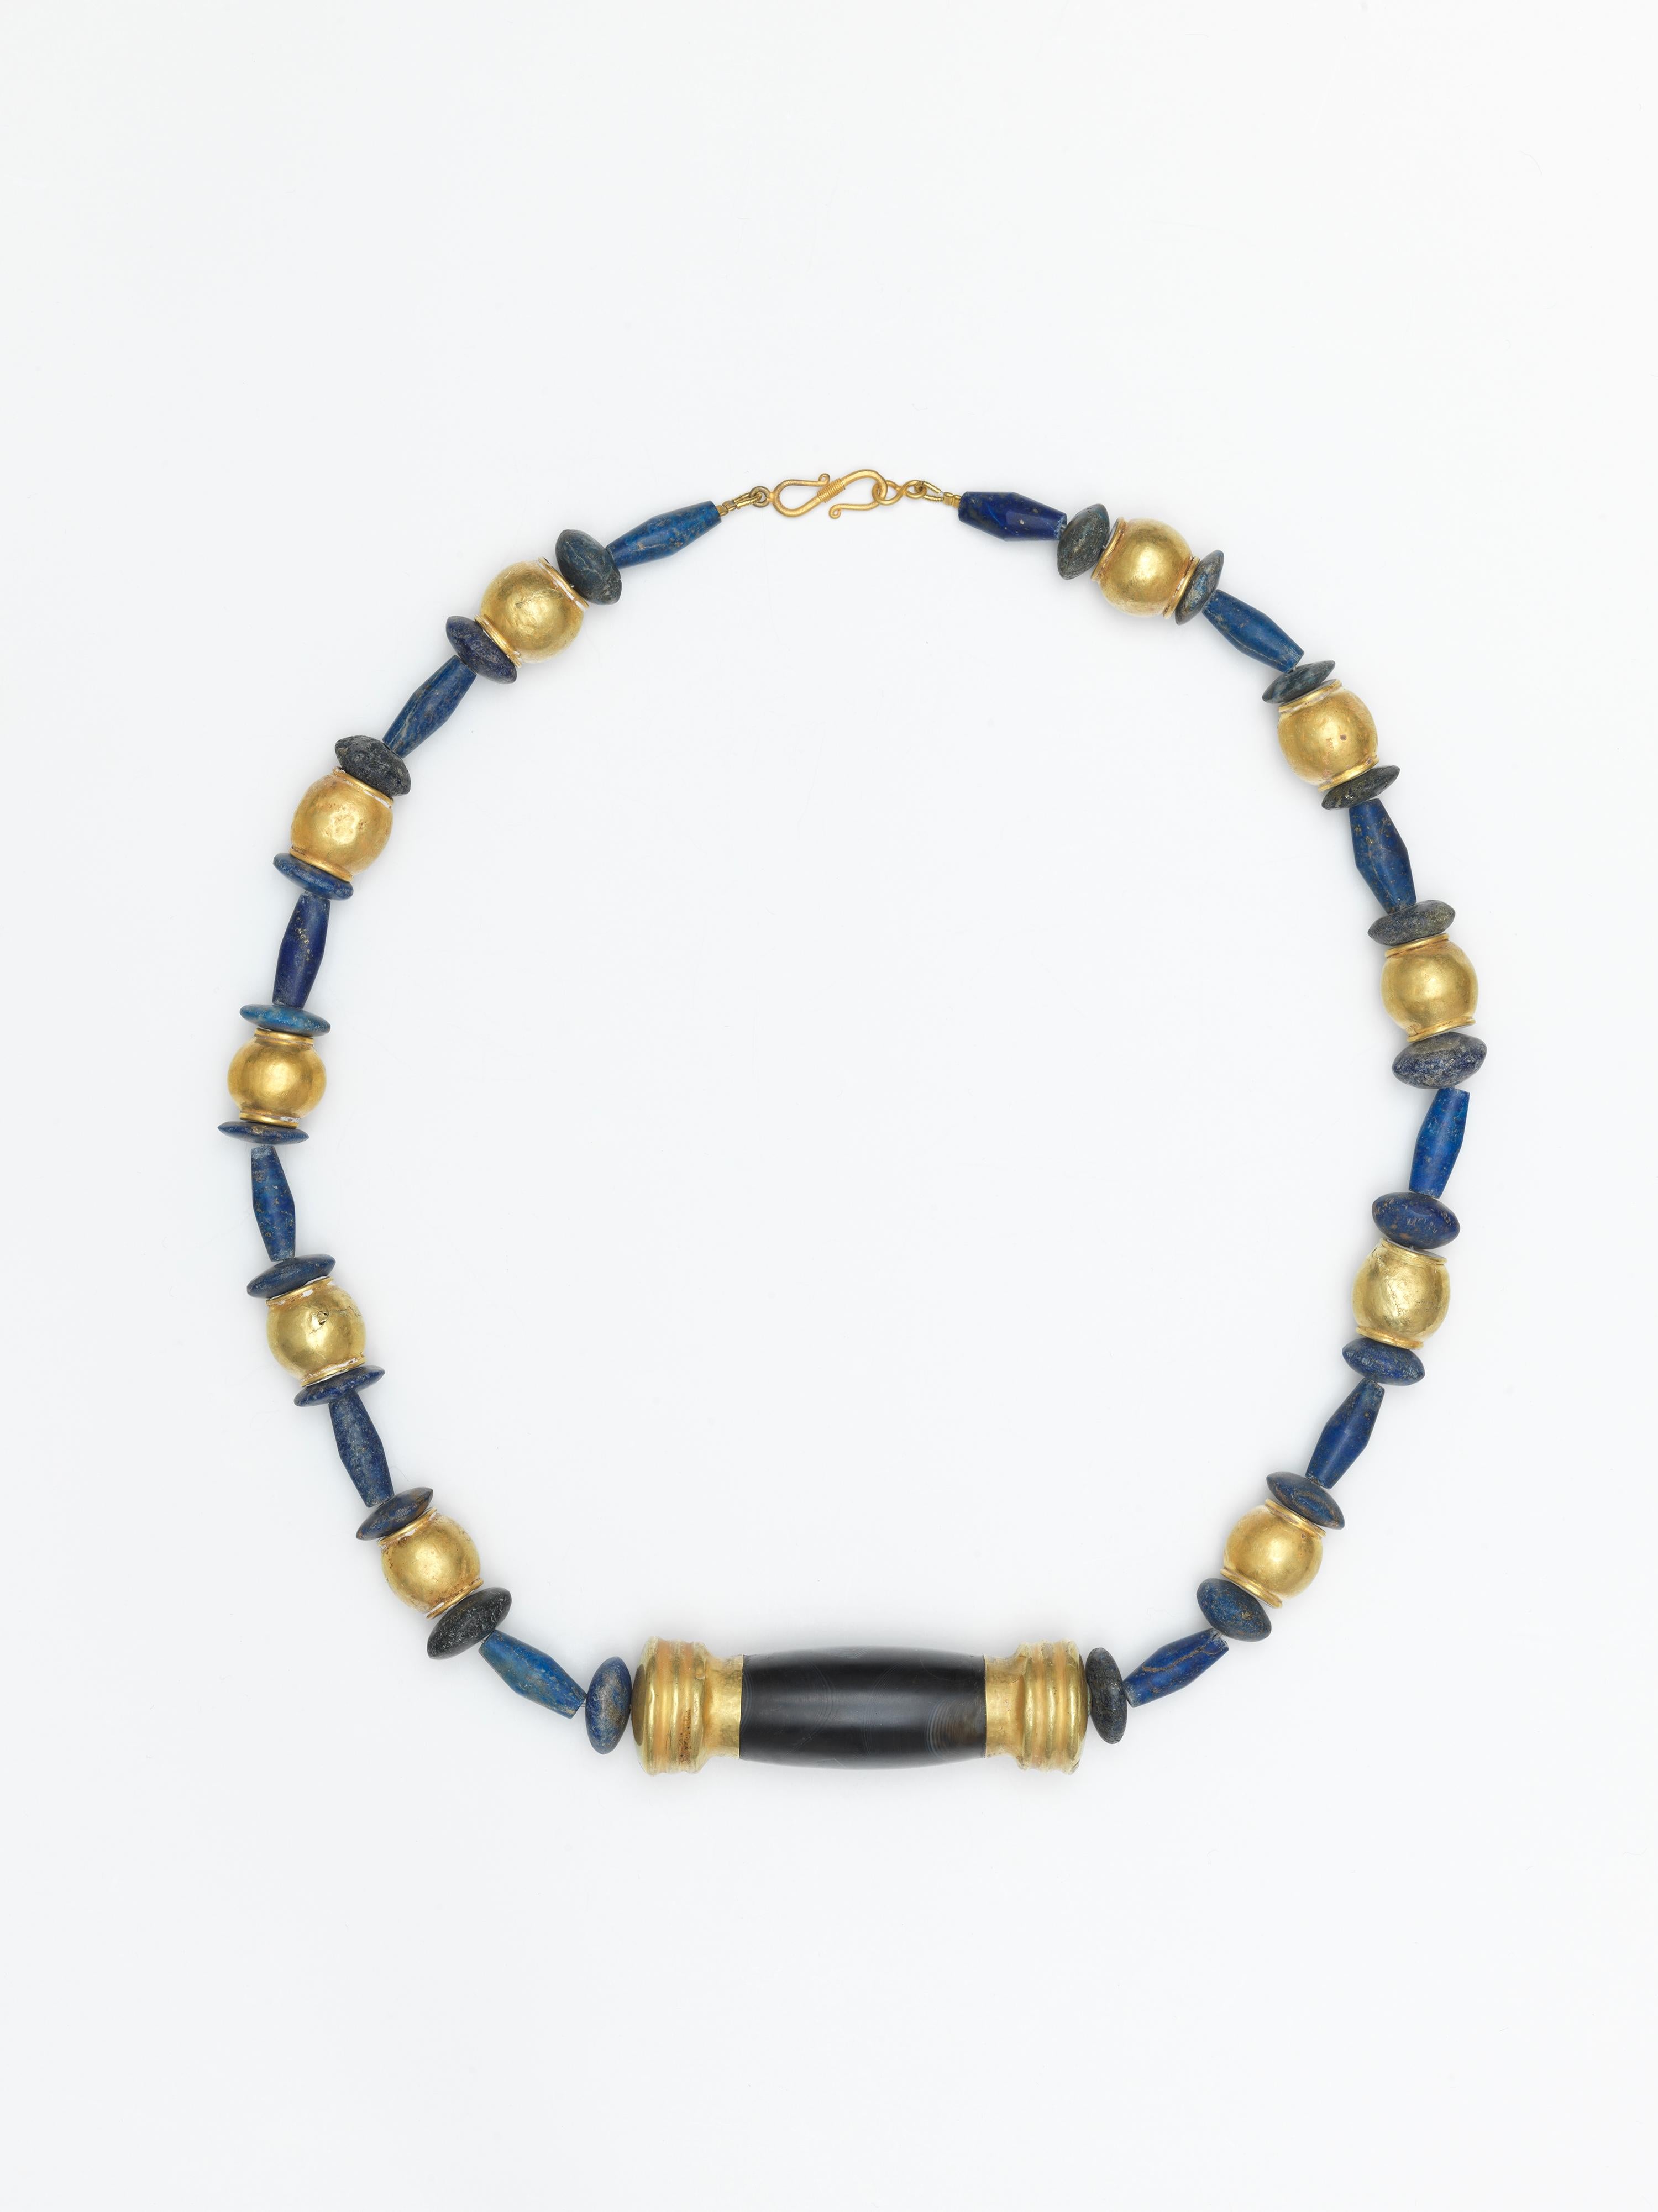 Mixed Cut  Lapis and Gold Beaded Necklace, with Central Gold-Capped Black Agate  For Sale